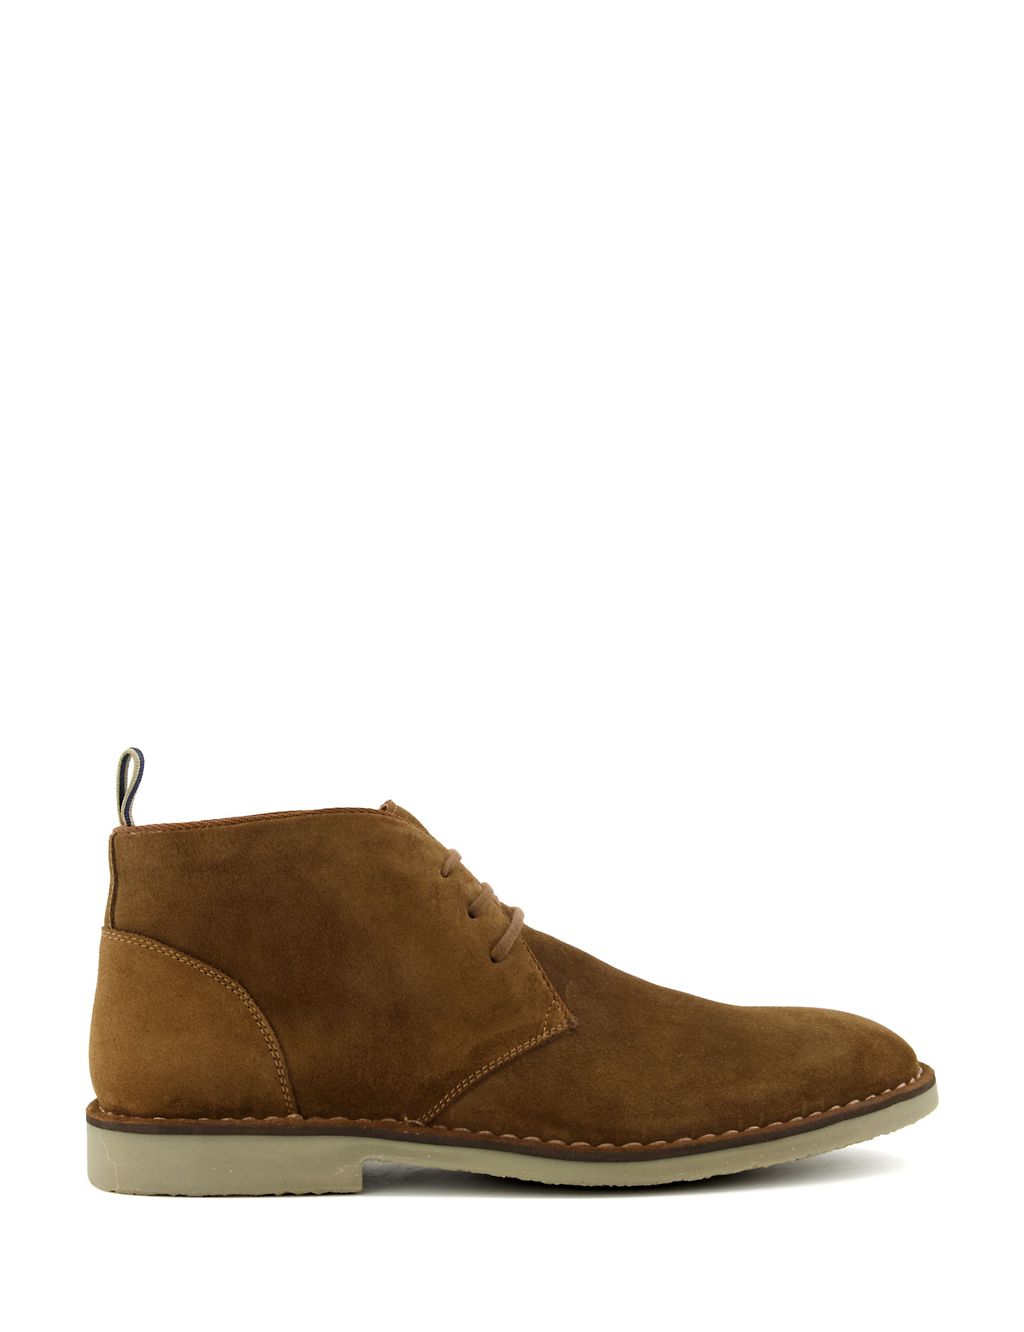 Cashed Chukka Boot 3 of 3